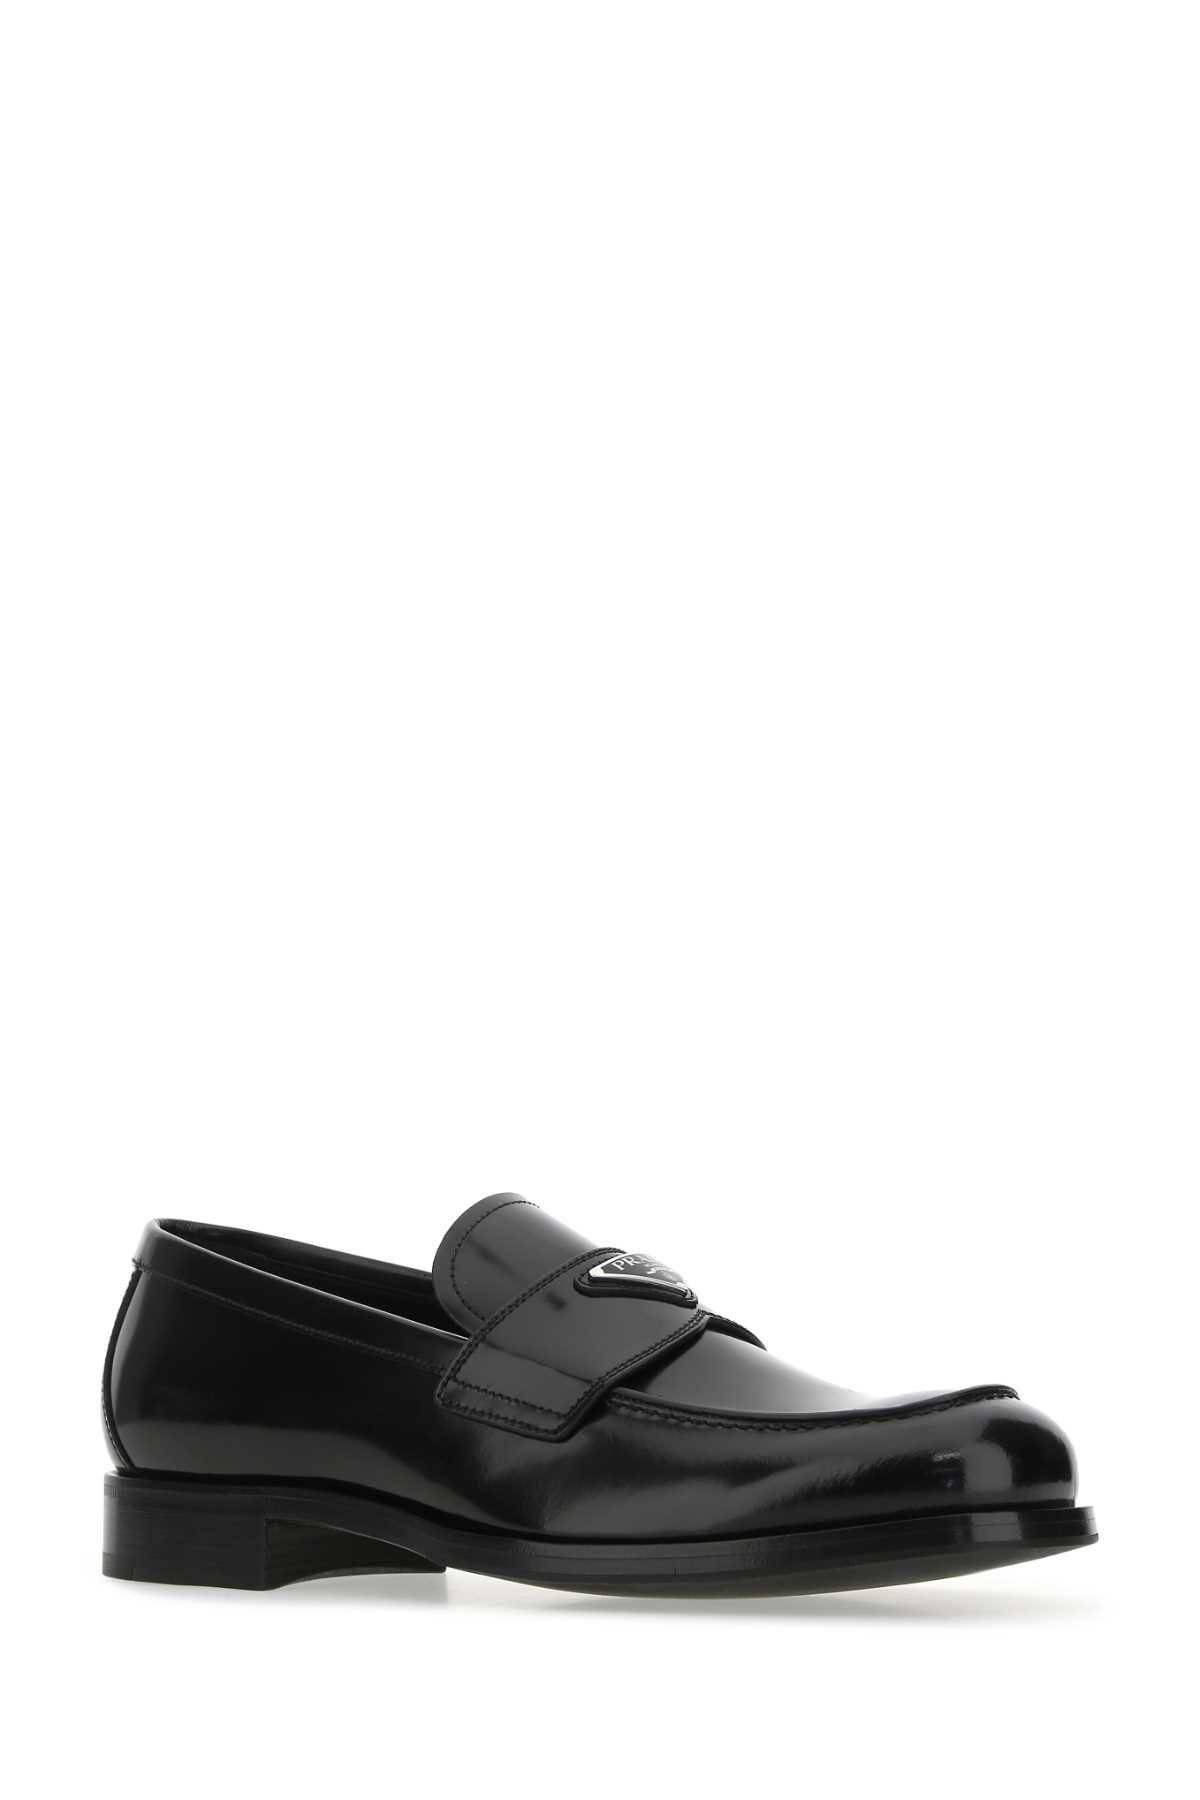 Shop Prada Black Leather Loafers In F0002